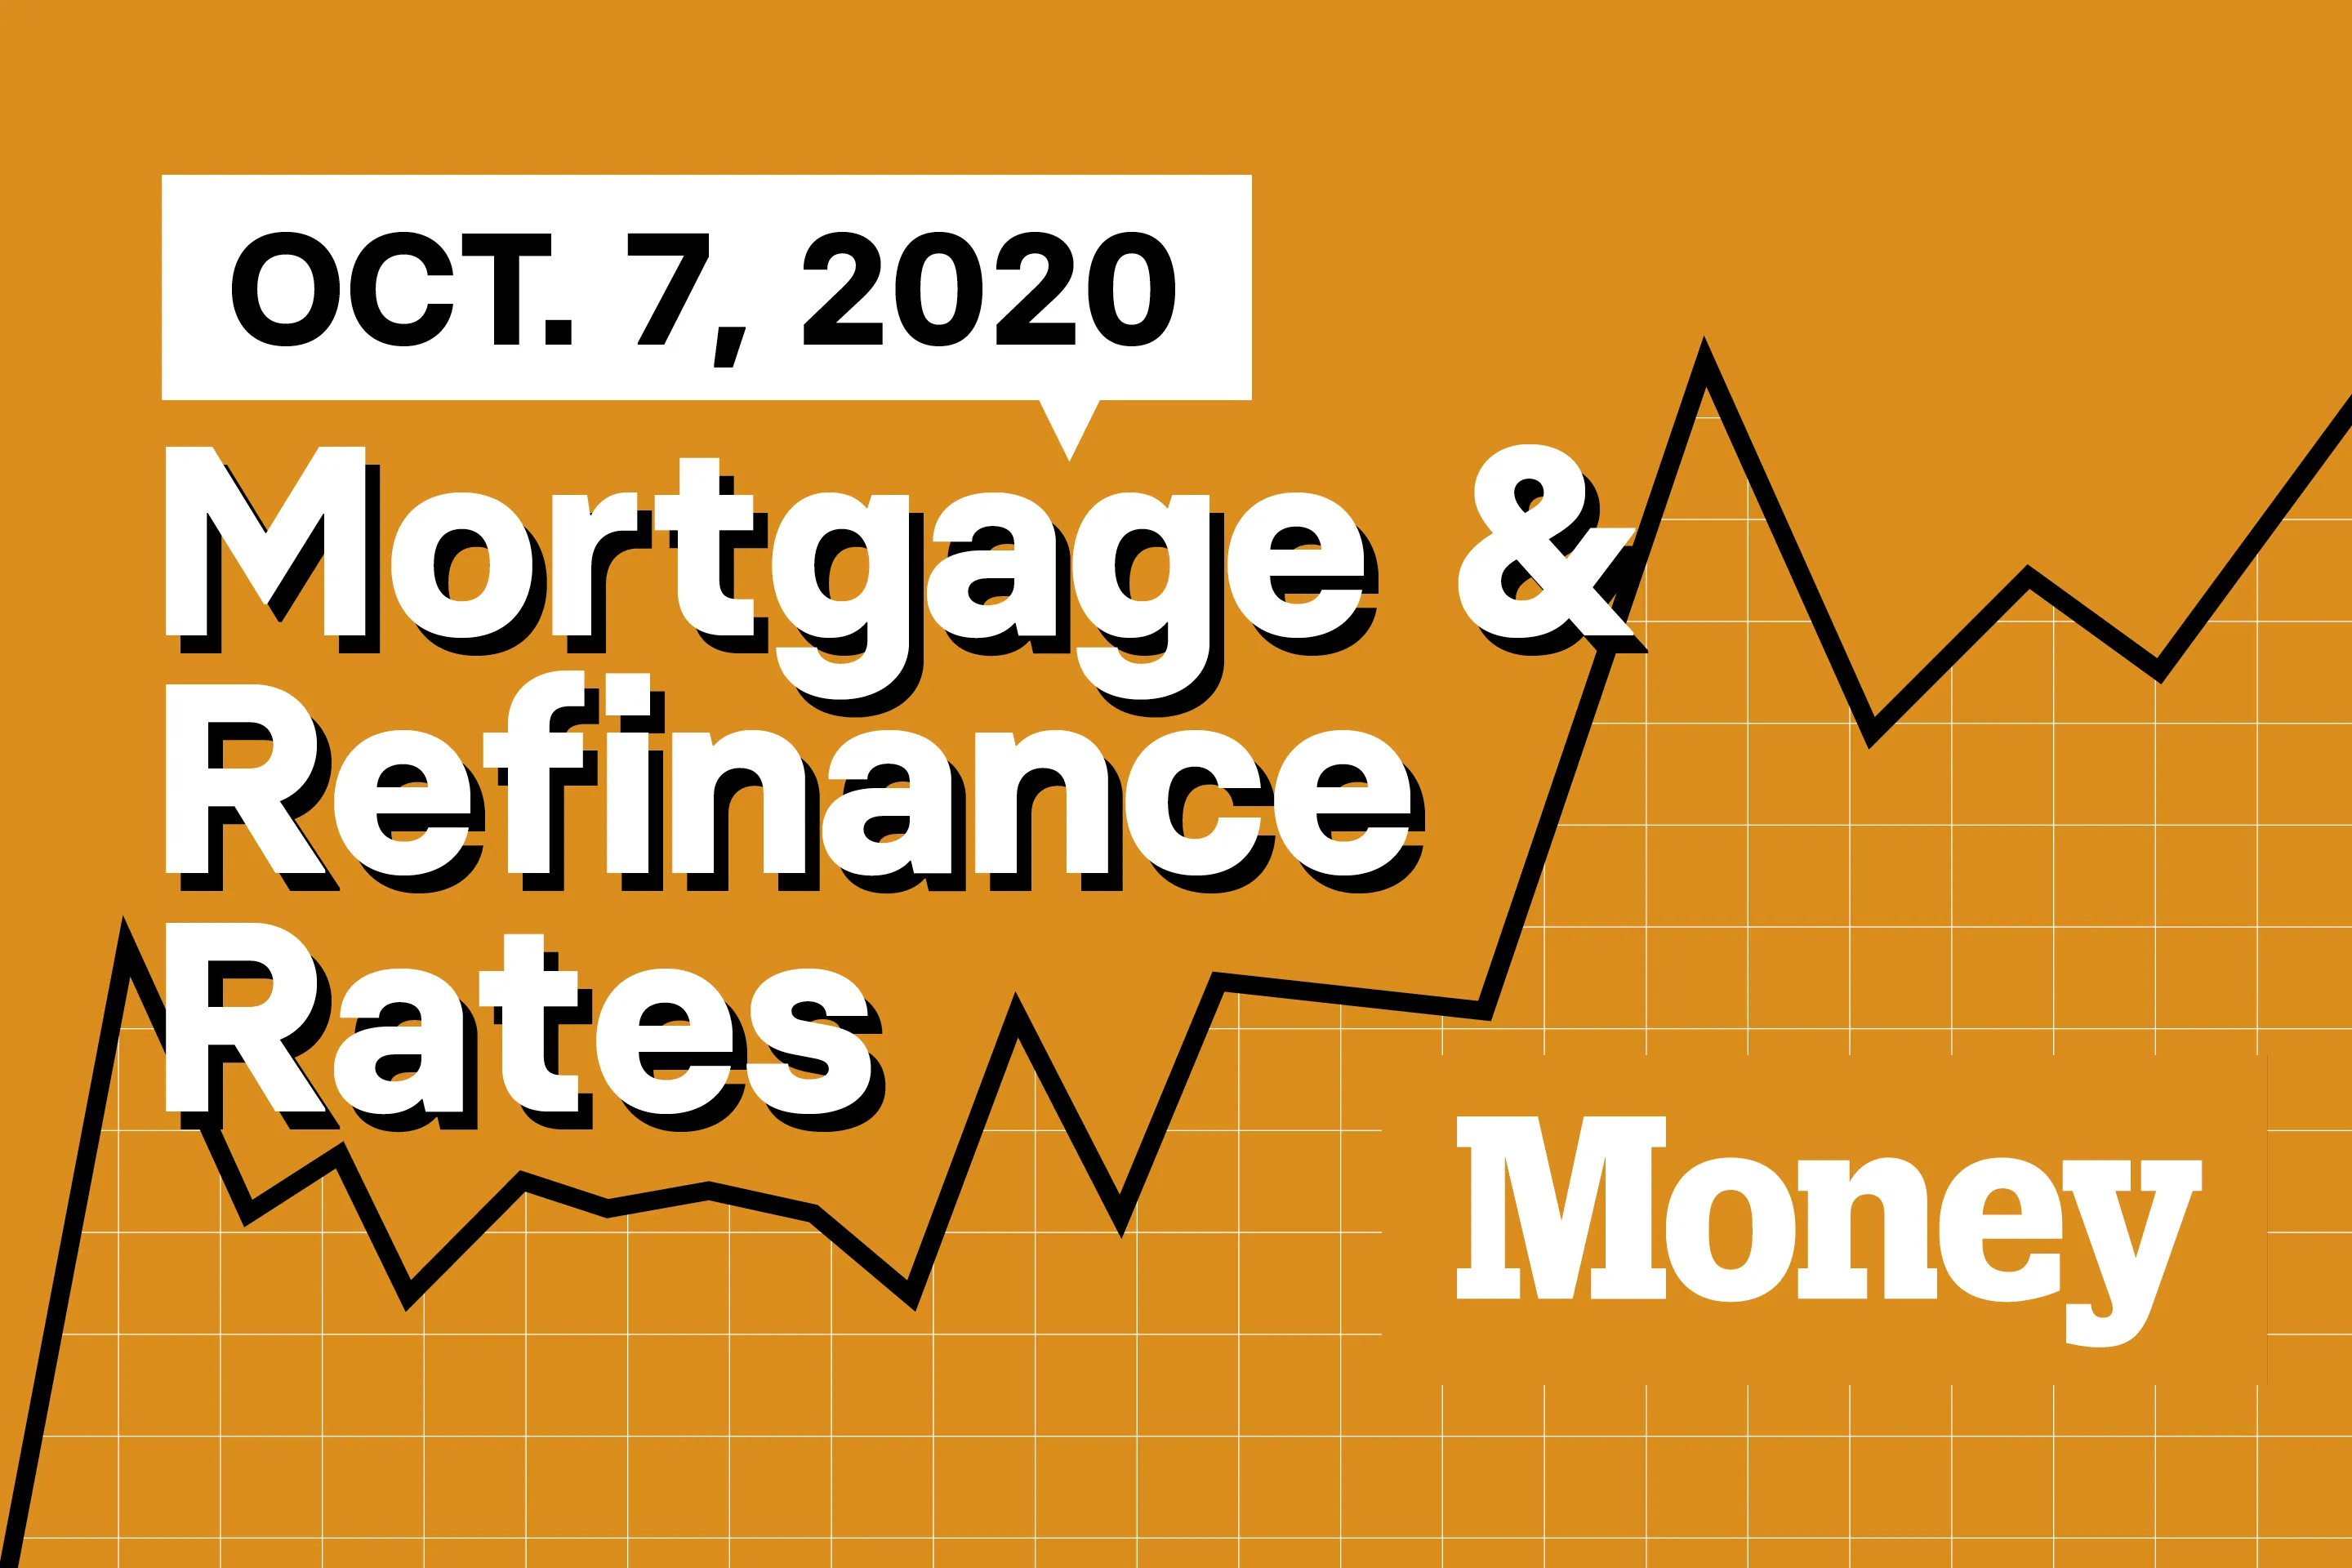 Here Are Today's Best Mortgage & Refinance Rates for October 7, 2020